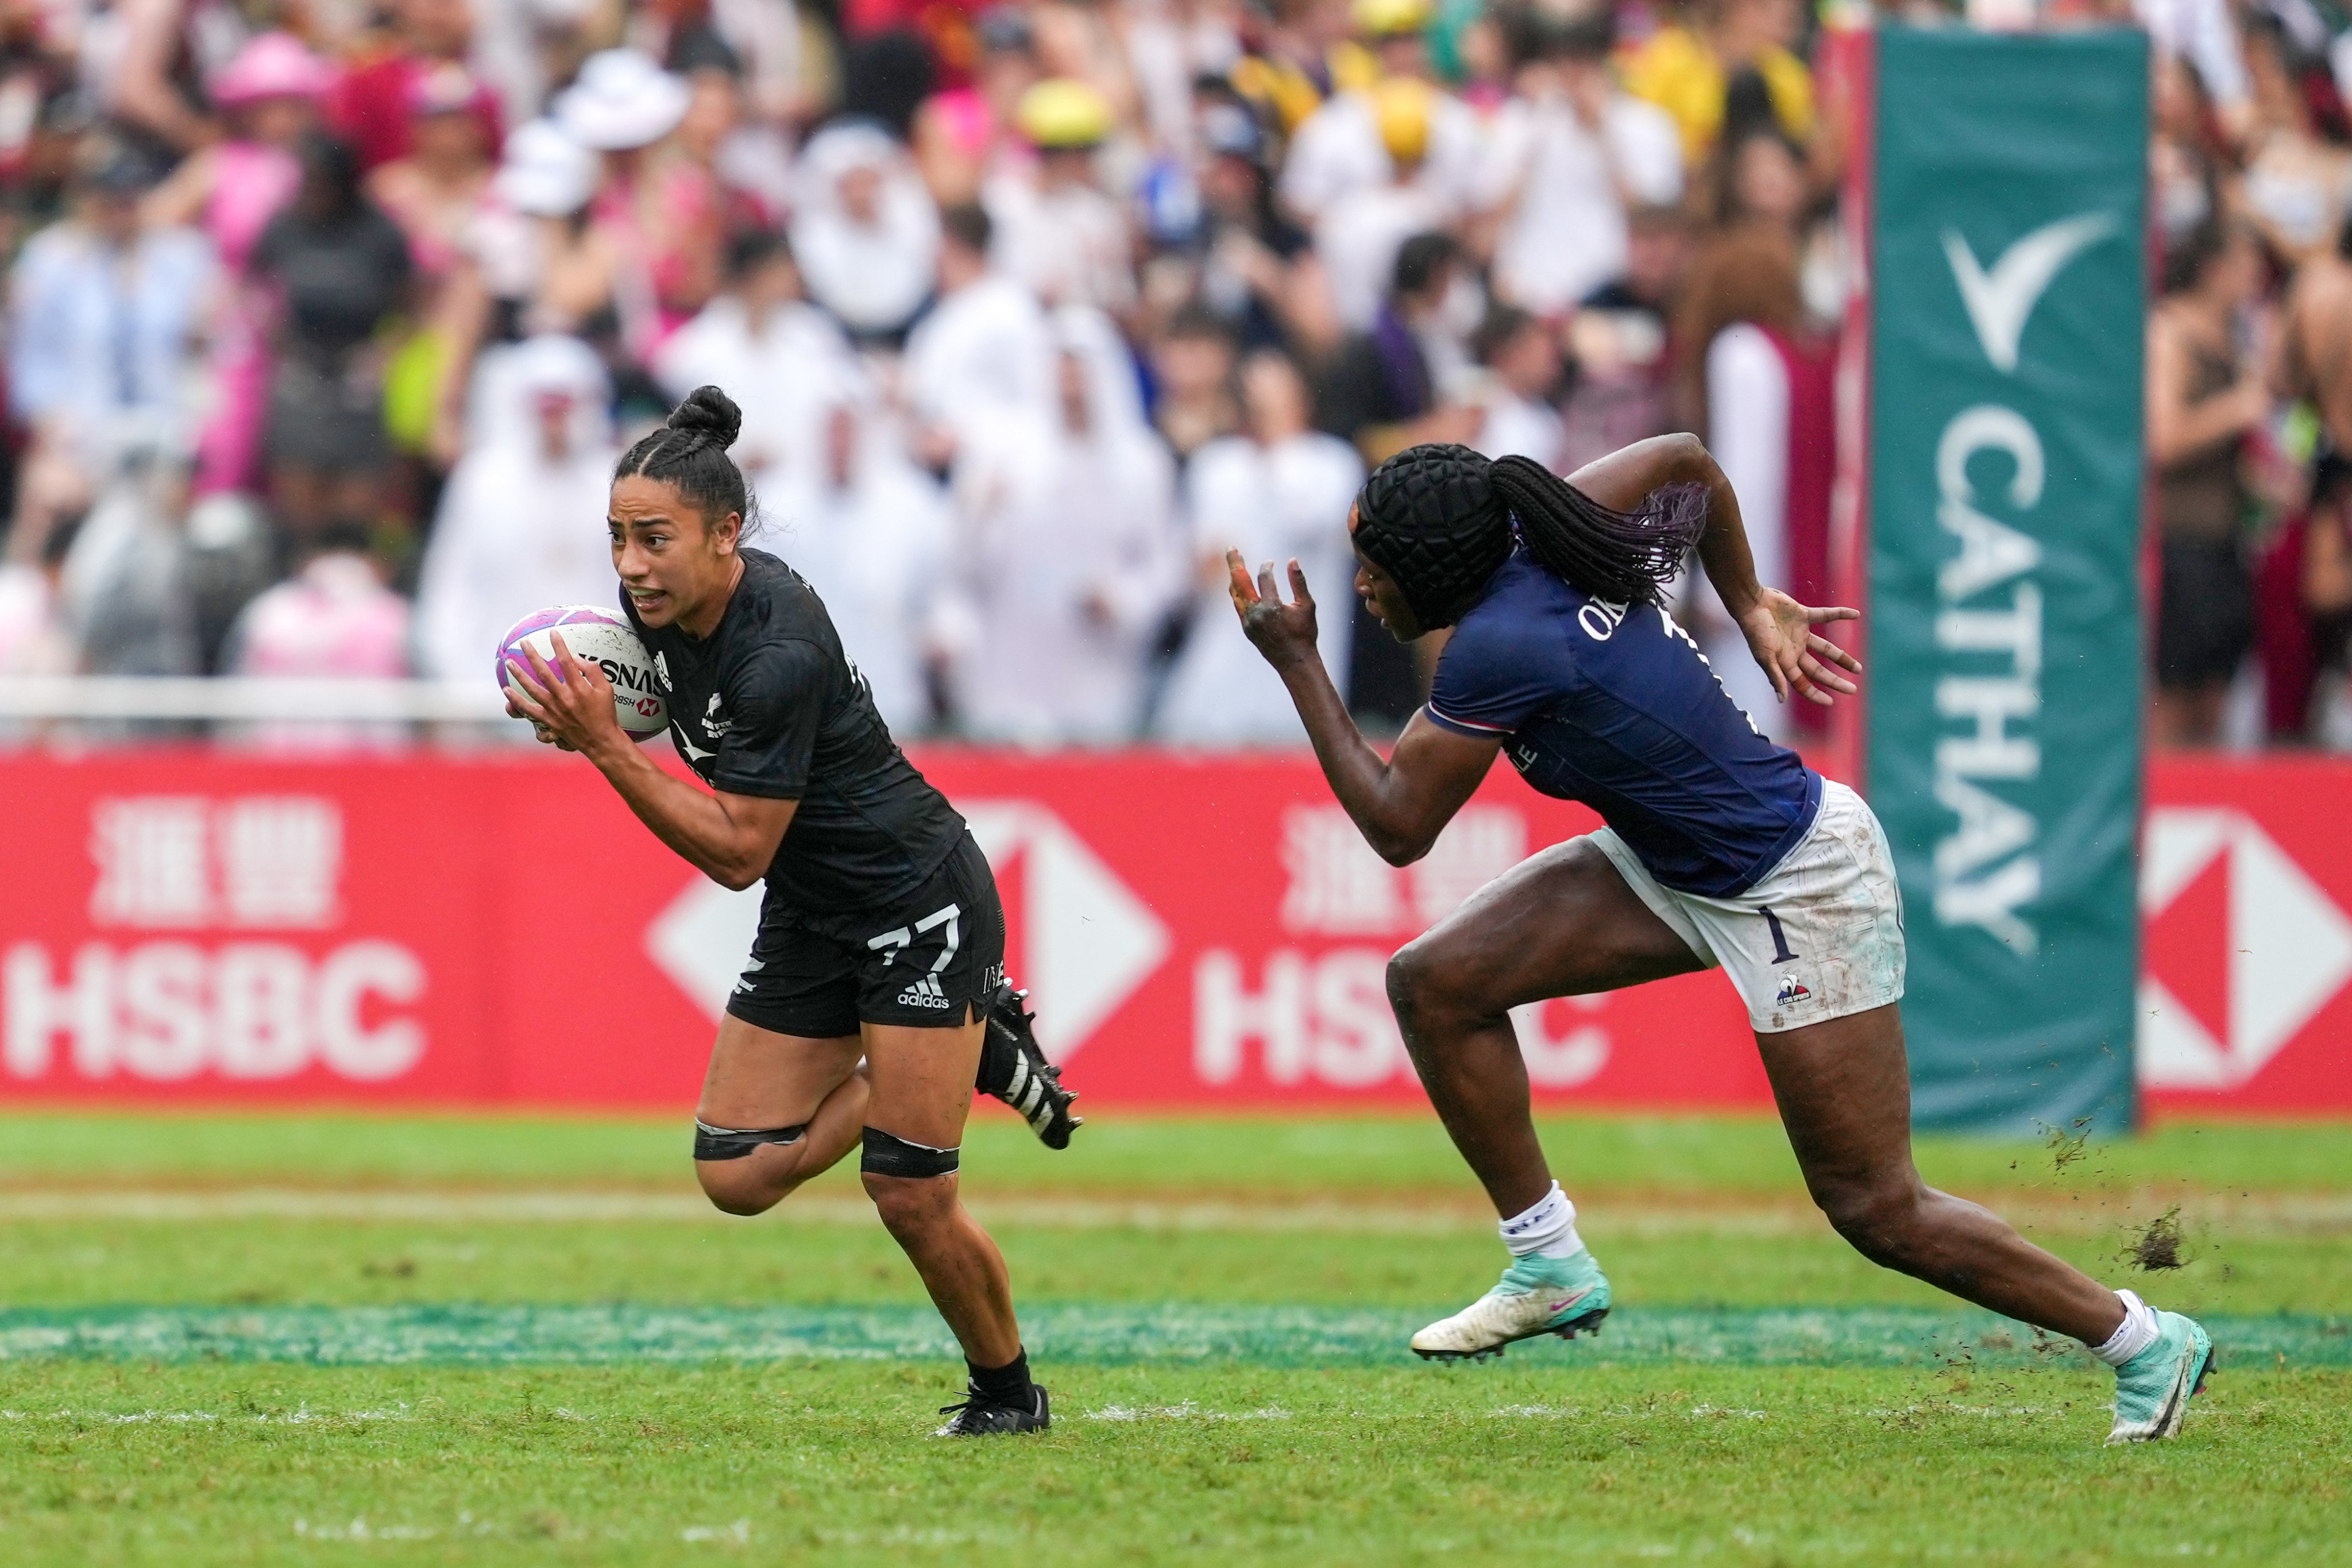 France’s Seraphine Okemba (right) chases down New Zealand’s  Risi Poori-Lane during their game on the second day of the Cathay/HSBC Hong Kong Sevens. Photo: Elson Li